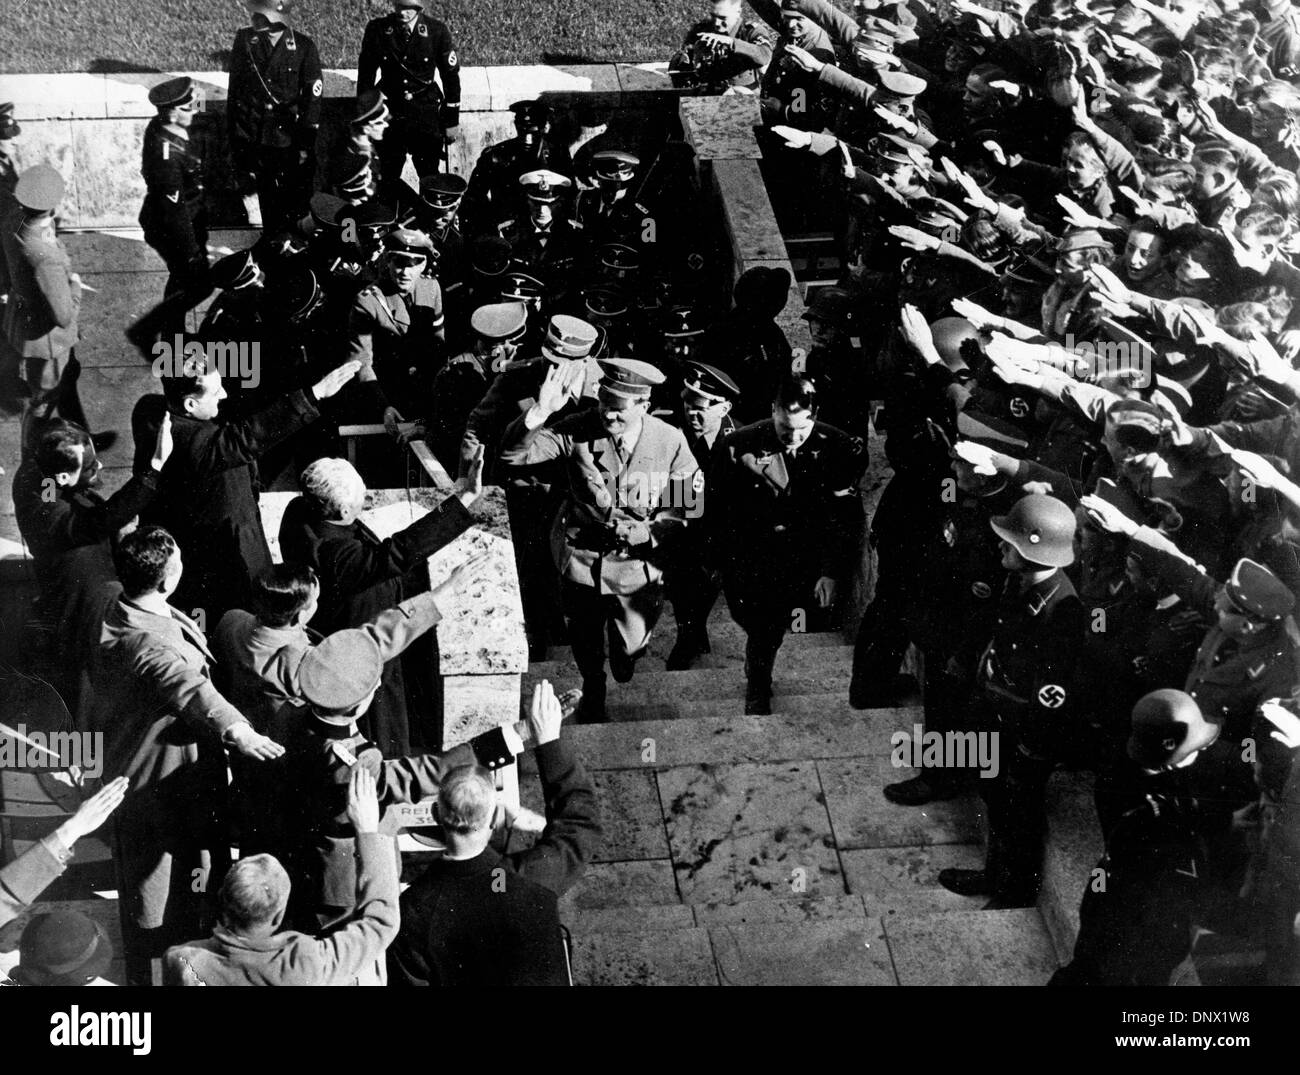 July 12, 1936 - Berlin, Germany - ADOLF HITLER Imperial Chancellor of Germany and the leader of the Nazi Party arriving at the Olympic Stadium. Adolf Hitler (April 20, 1889ÐApril 30, 1945) was the Fuhrer und Reichskanzler (Leader and Imperial chancellor) of Germany from 1933 to his death. He was leader of the National Socialist German Workers Party (NSDAP), better known as the Nazi Stock Photo